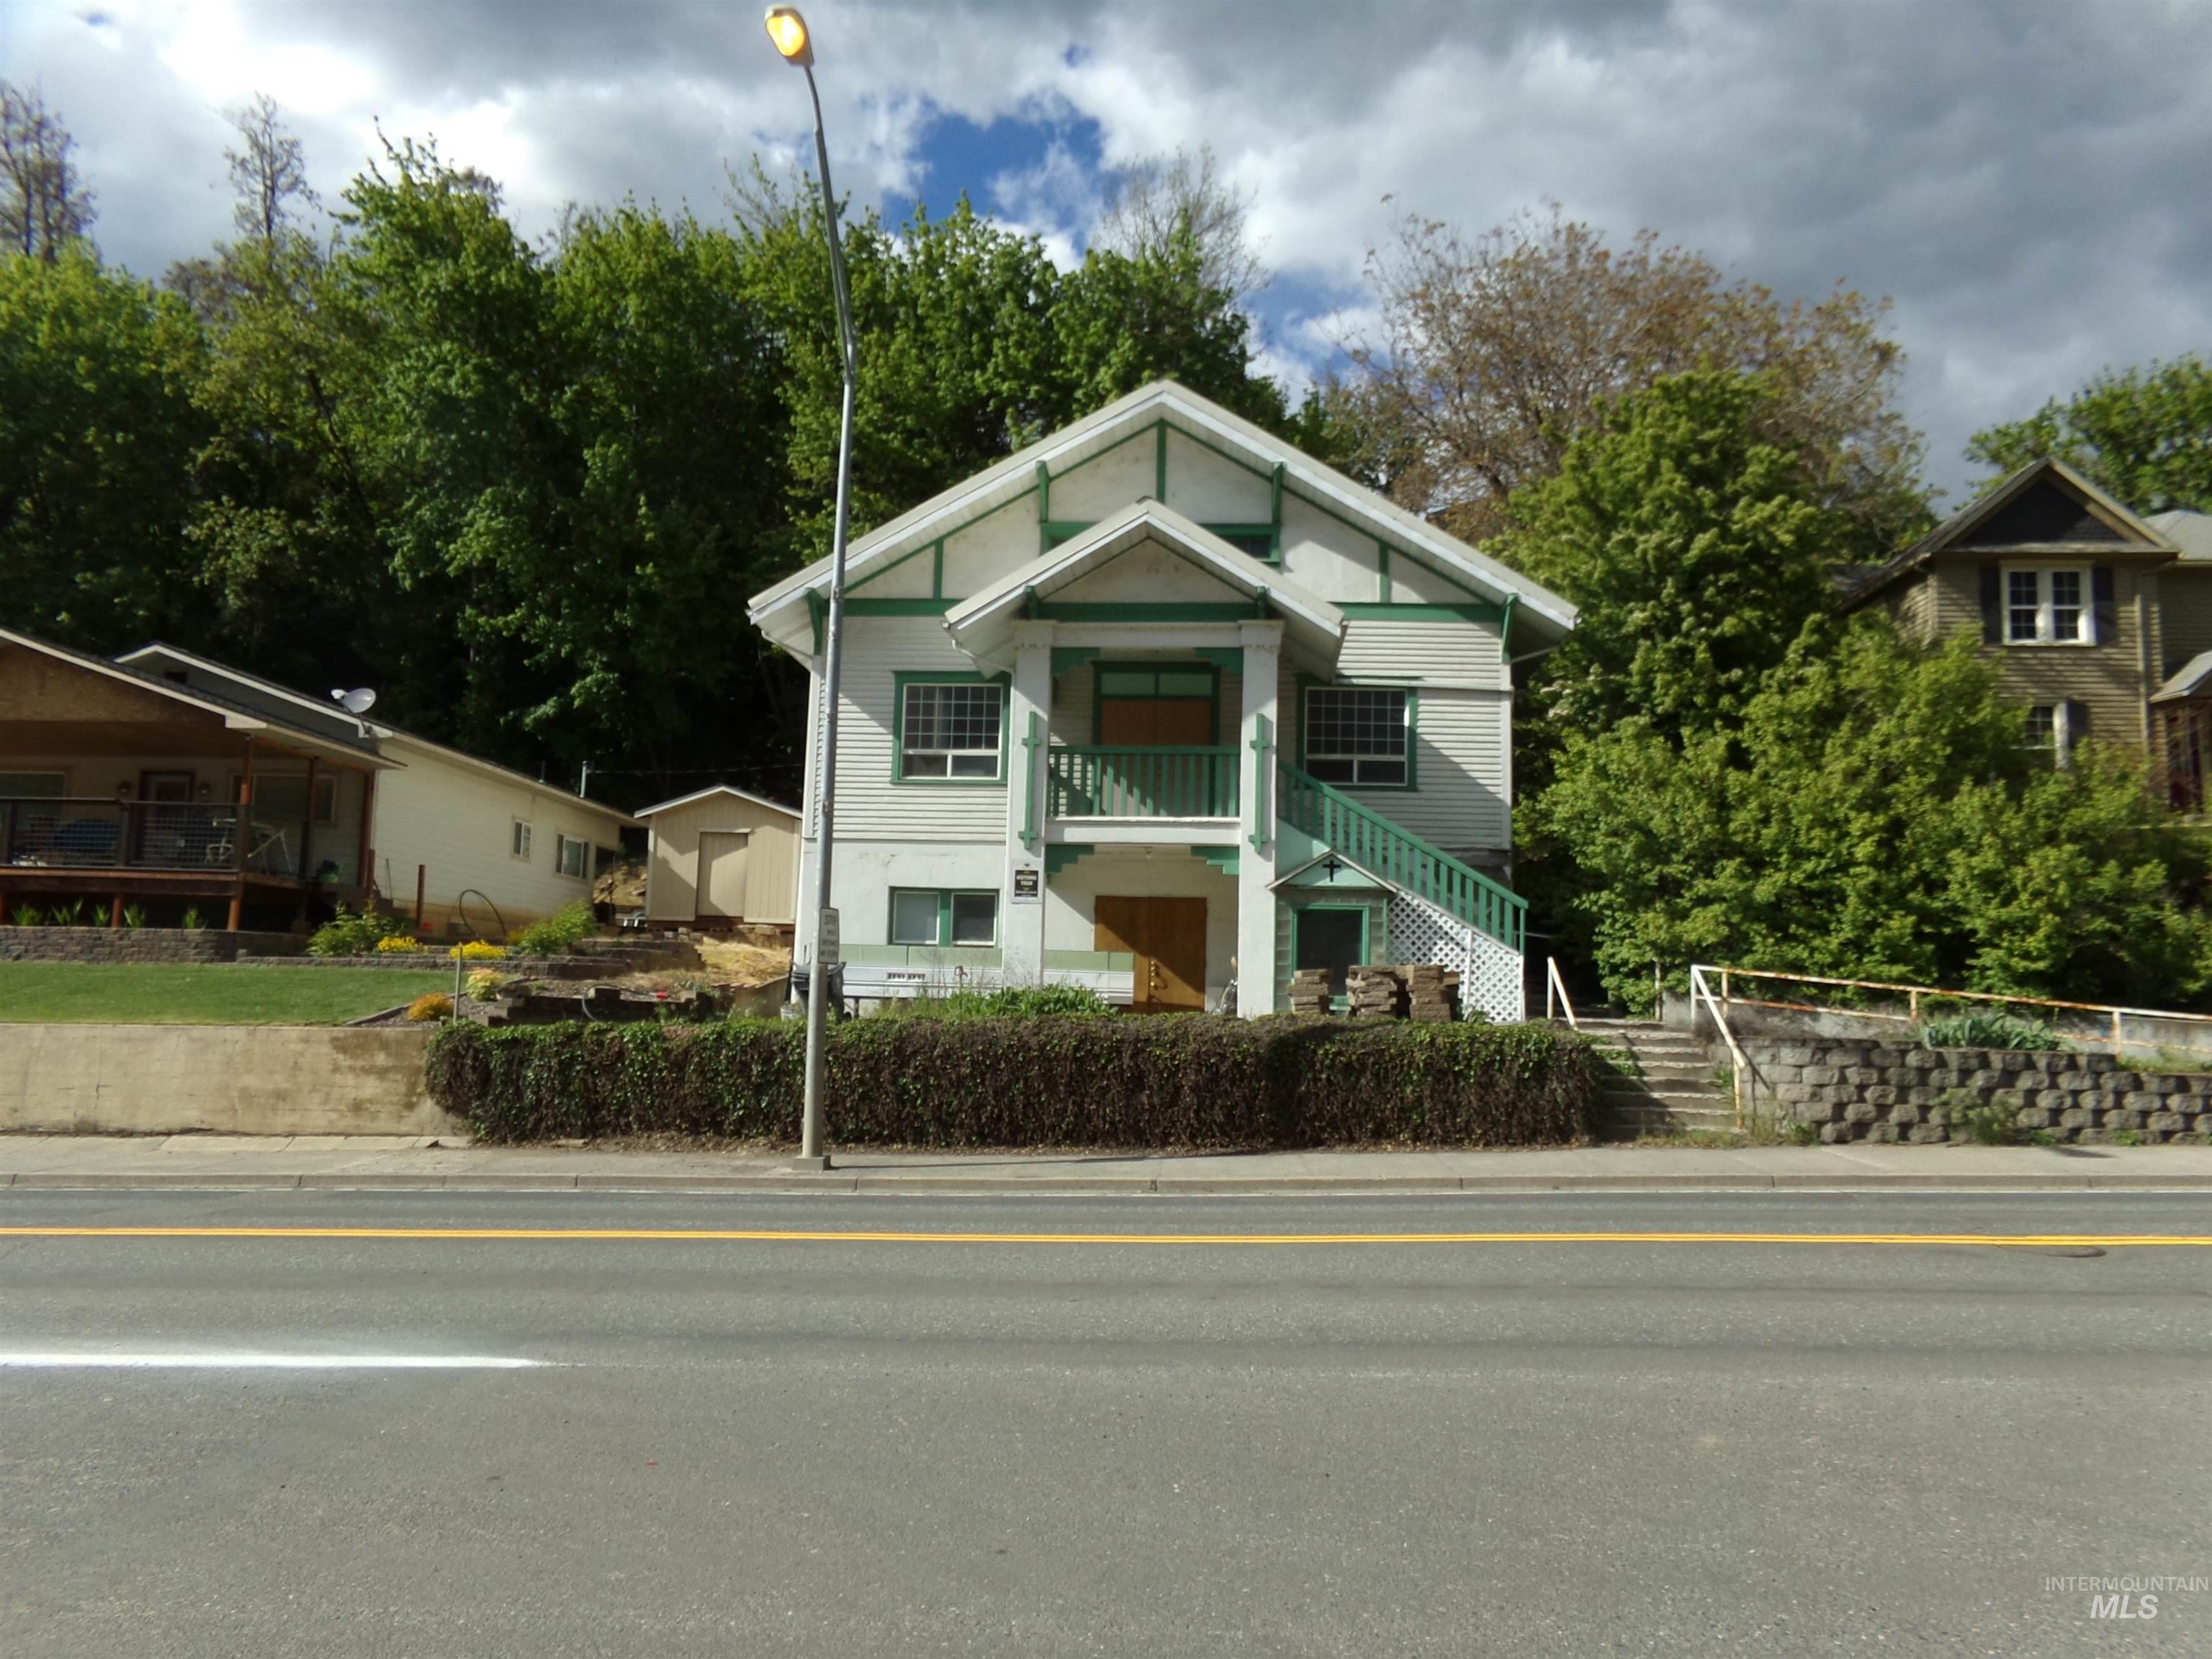 810 E Main street, Kendrick, Idaho 83537, Business/Commercial For Sale, Price $129,900,MLS 98909216